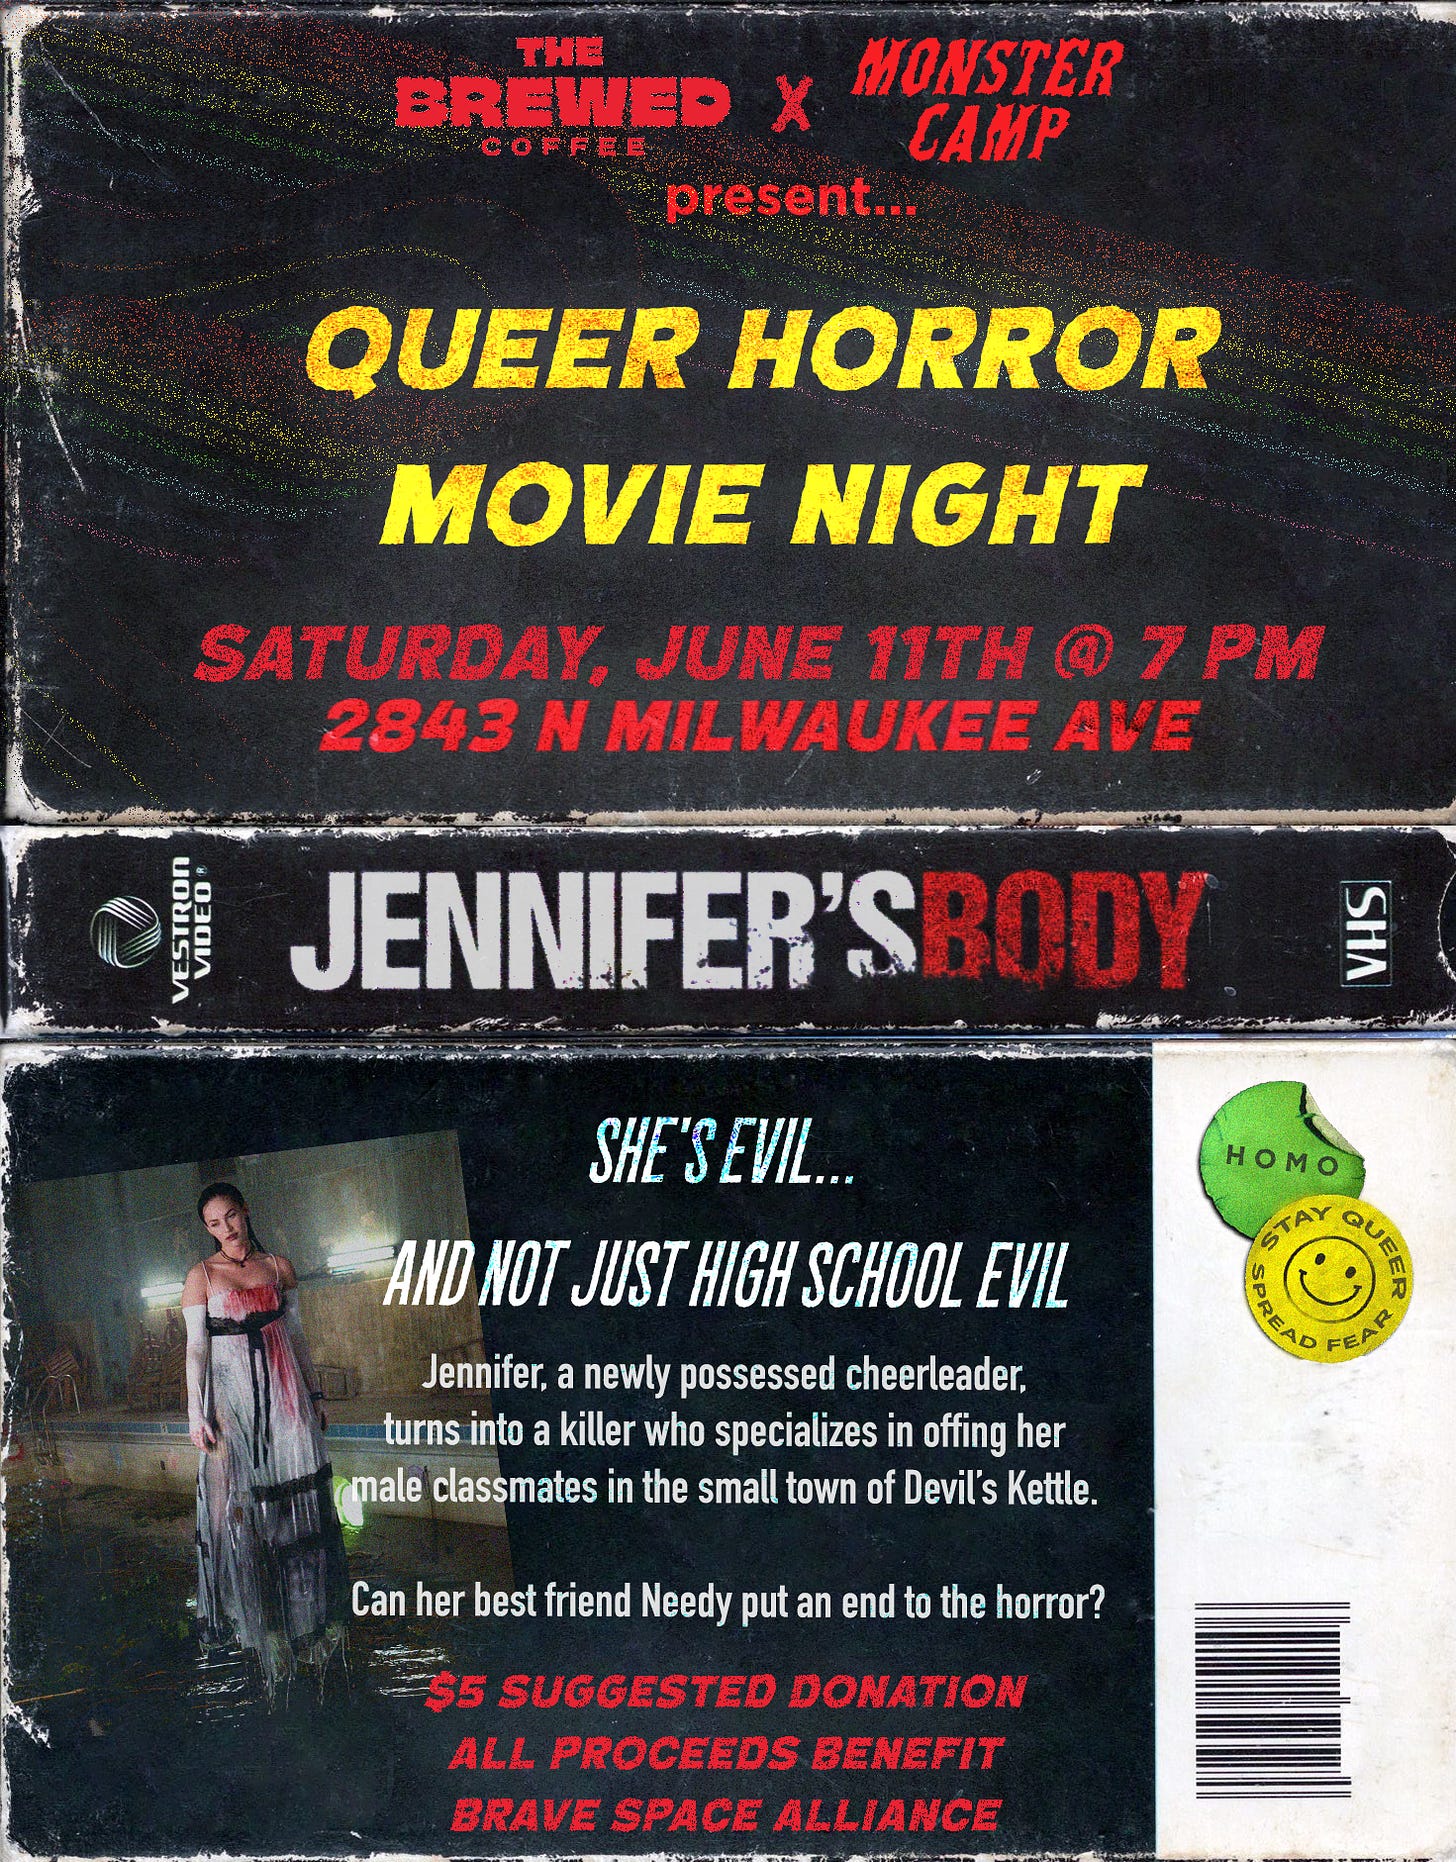 Queer horror movie night poster designed by Beyza Ozer.